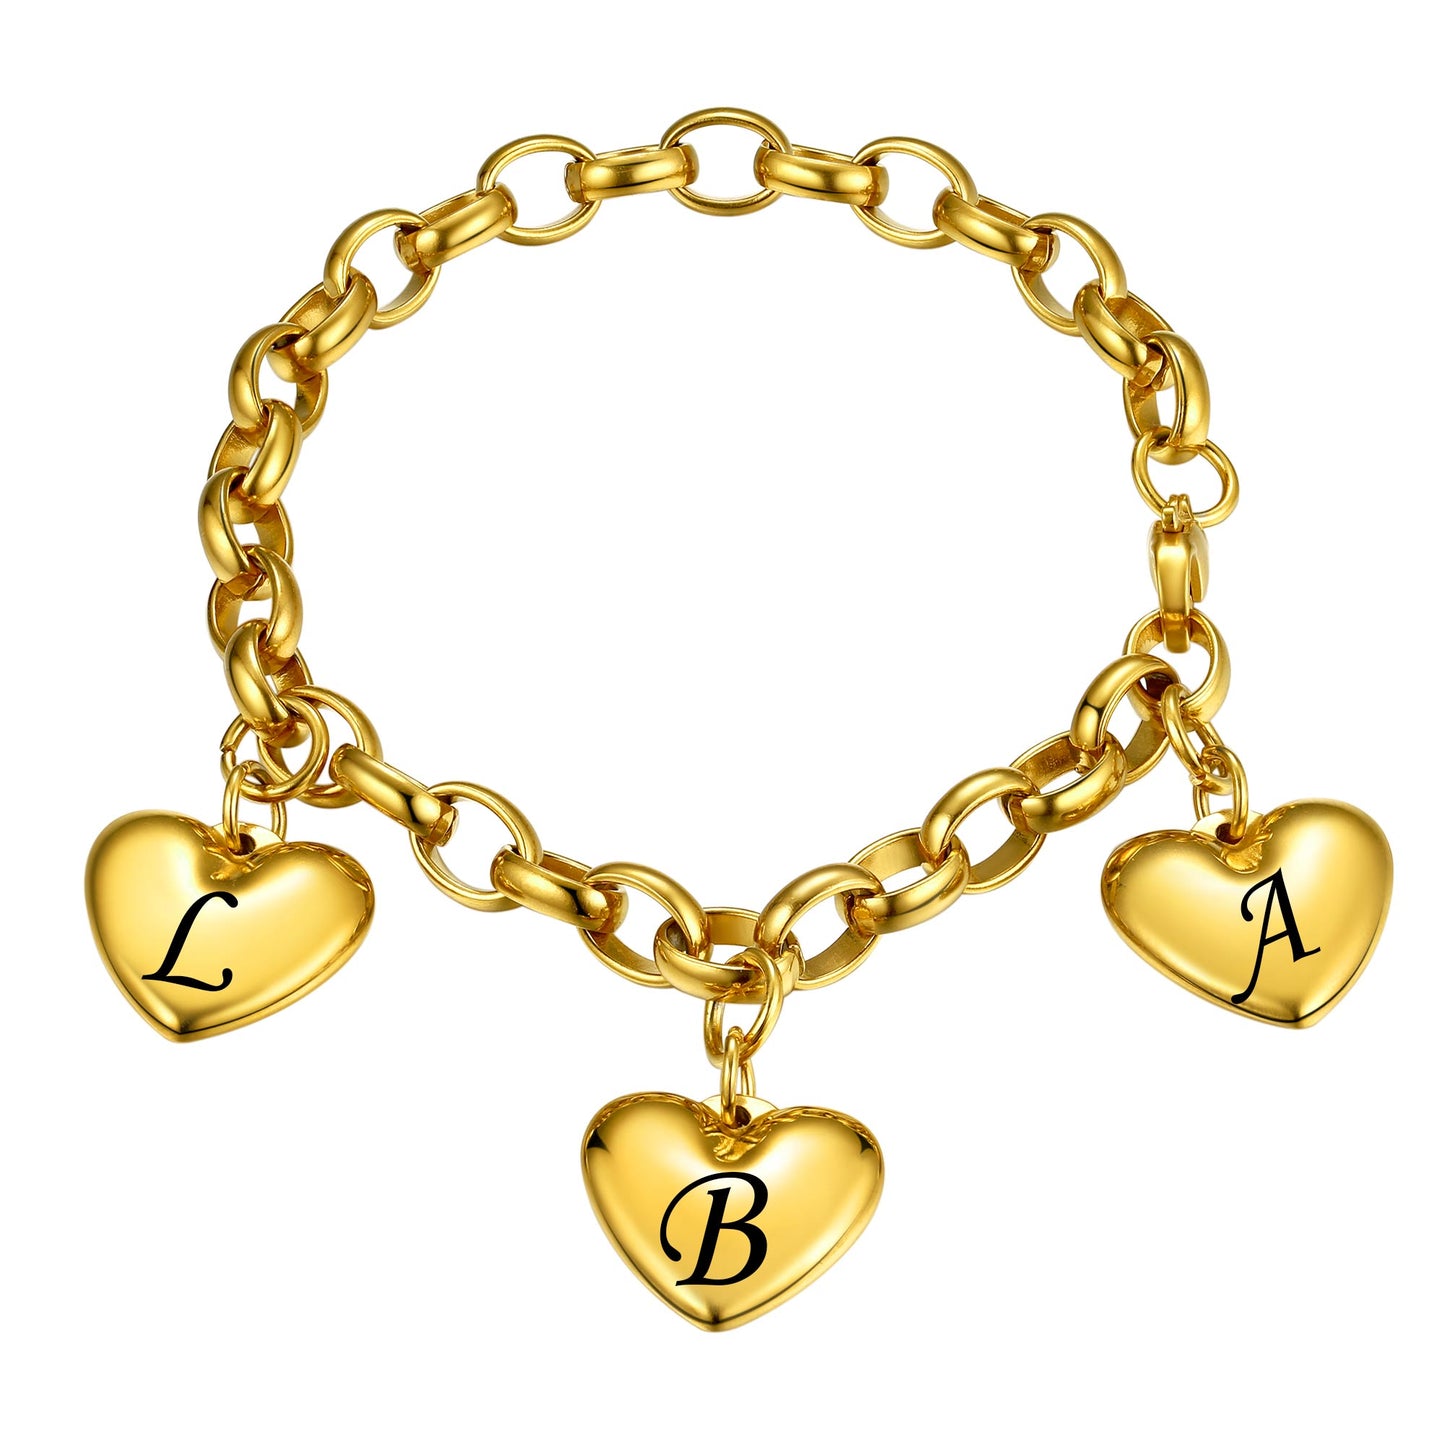 Personalized Engraved Hearts Charm Bracelet 3 heart